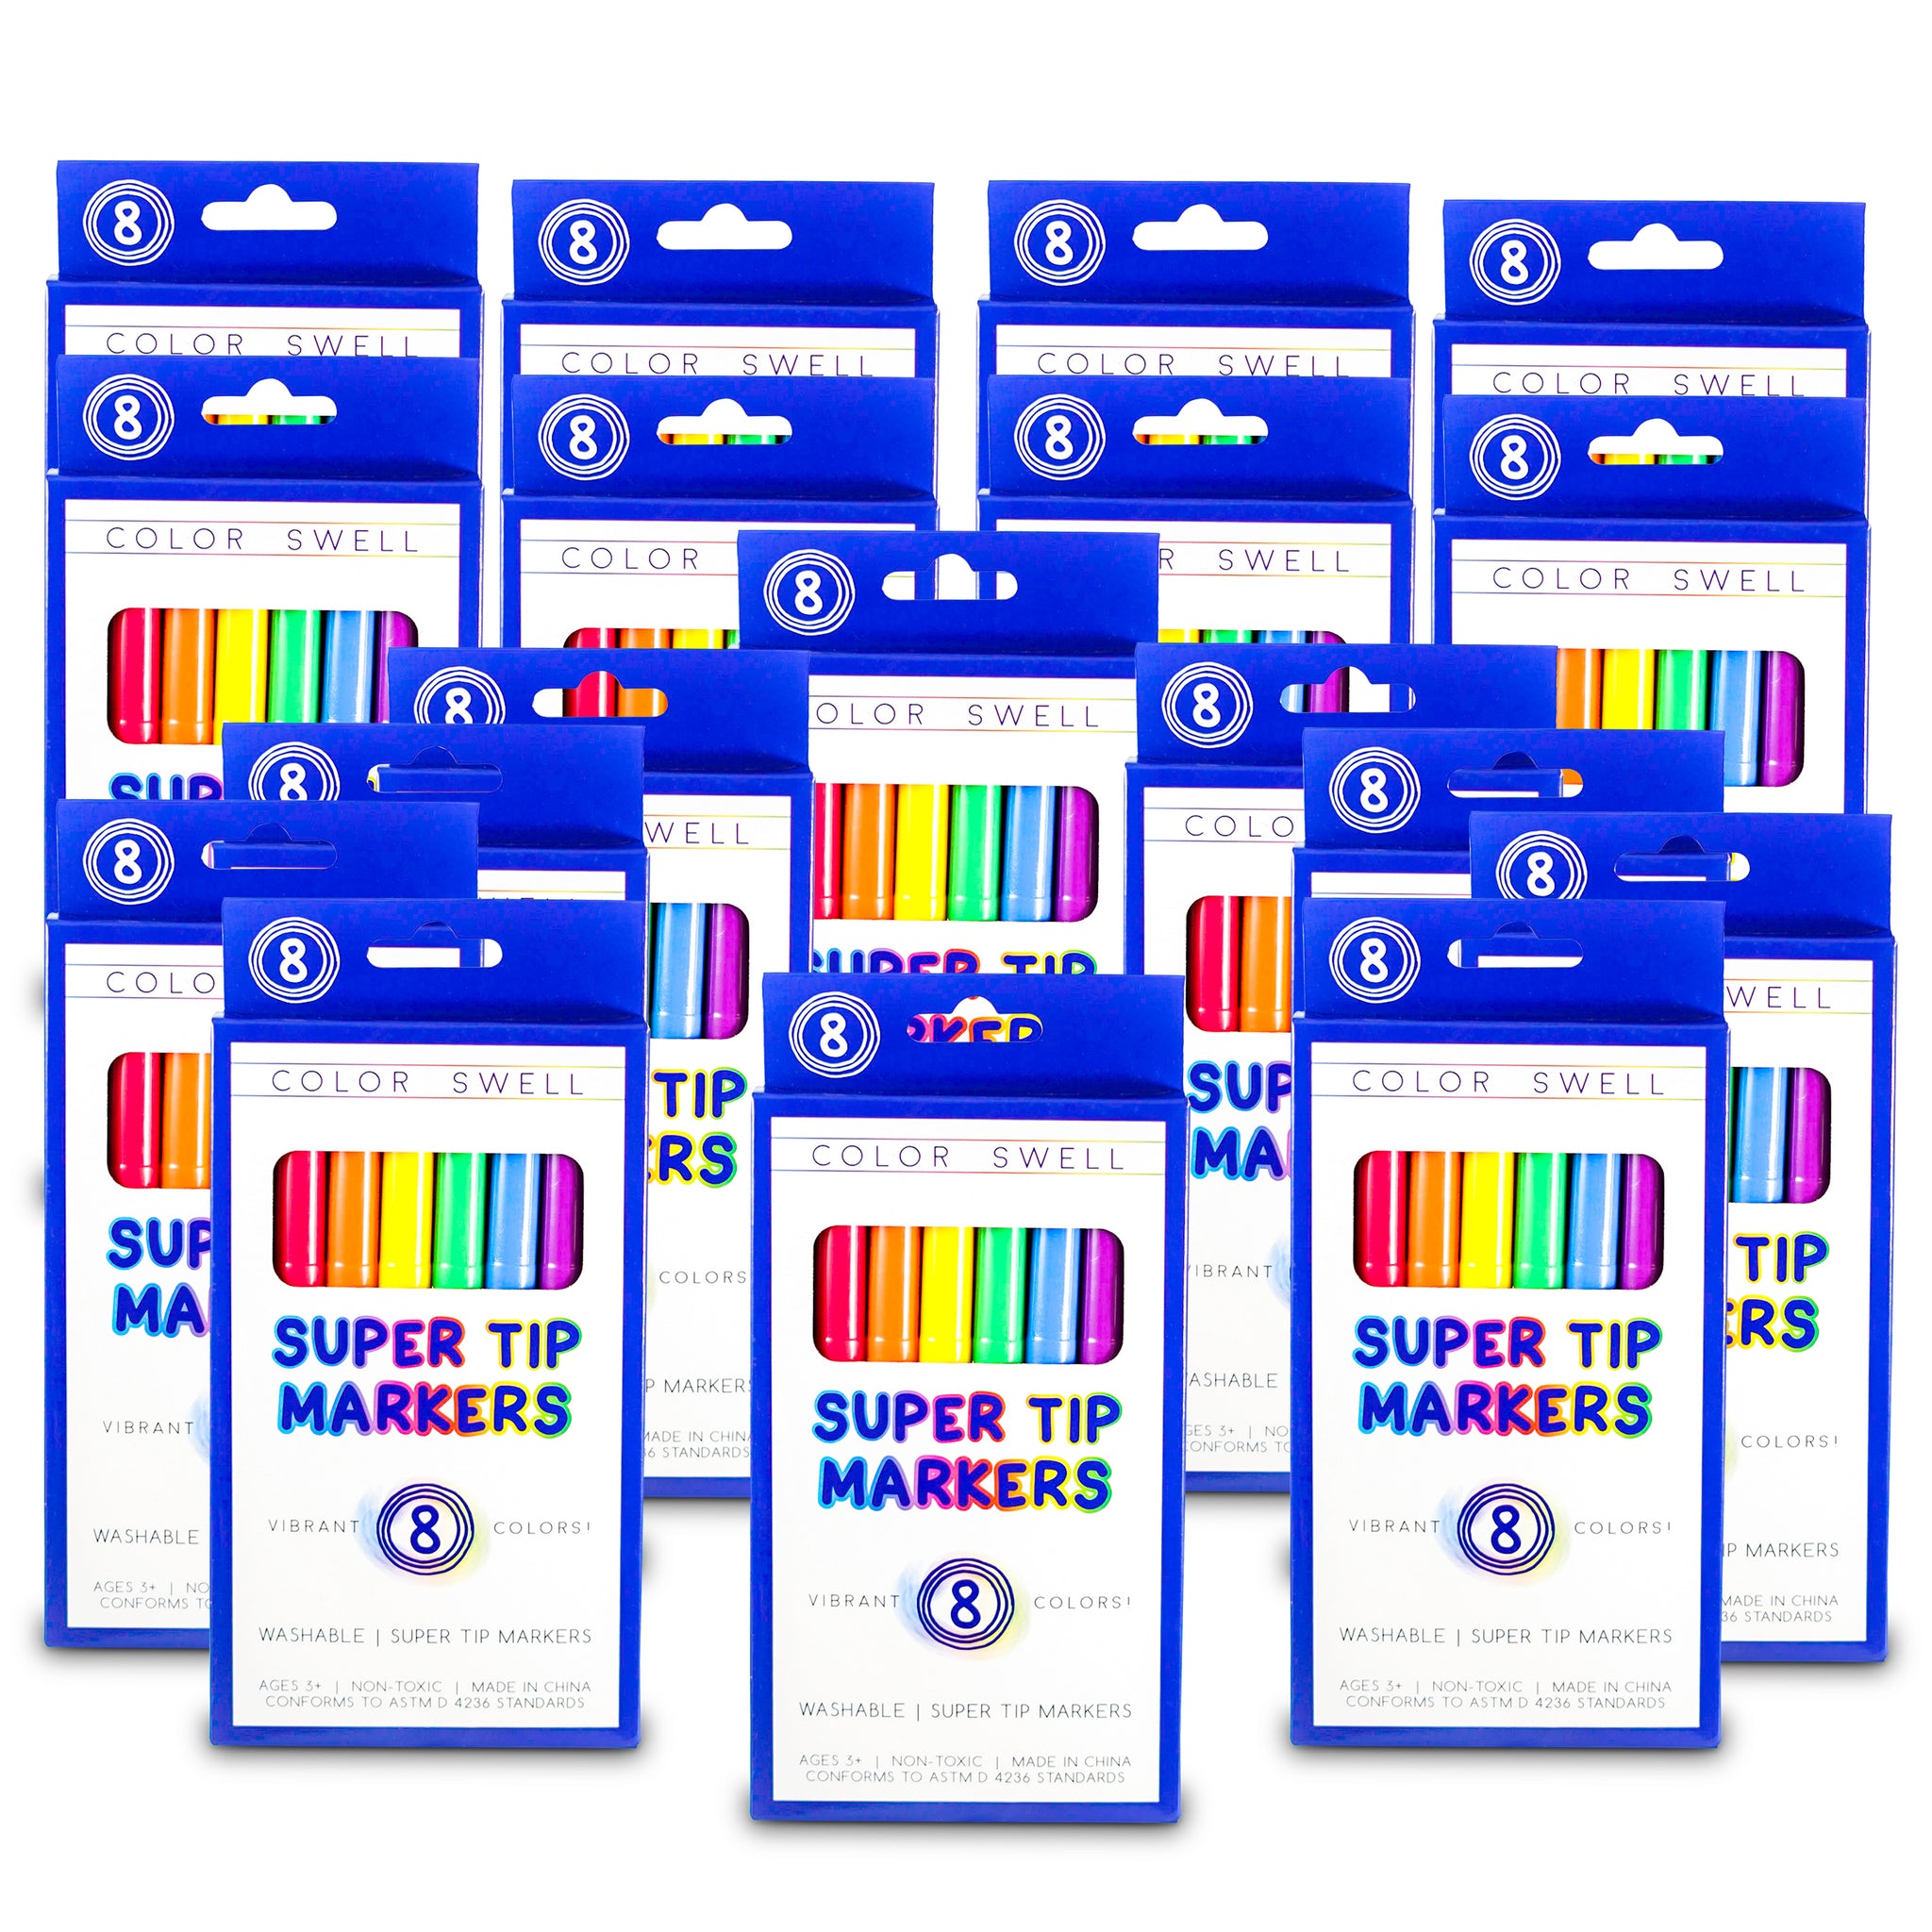 Color Swell Washable Markers Bulk 18 Pack, 8 markers per pack, 144 total markers  in bulk 